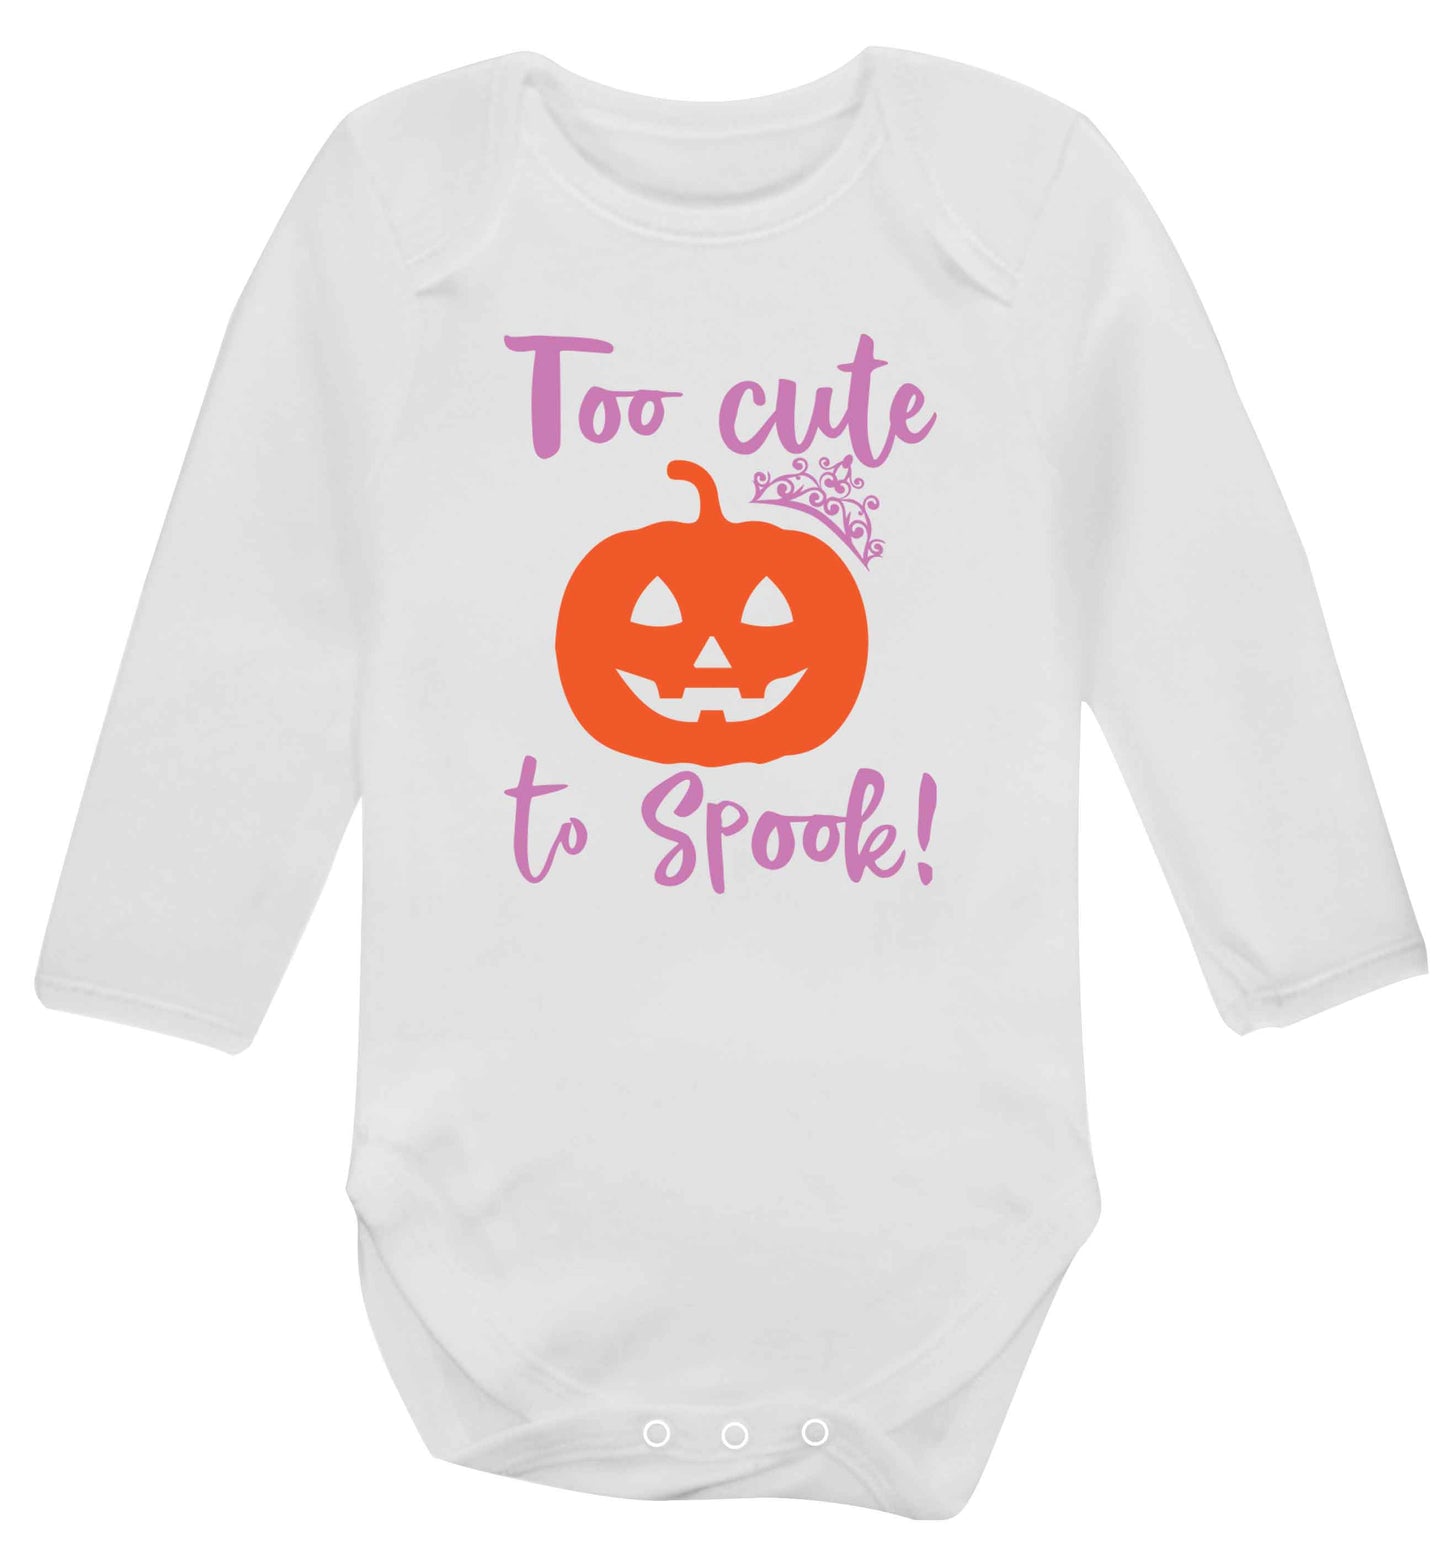 Too cute to spook! Baby Vest long sleeved white 6-12 months